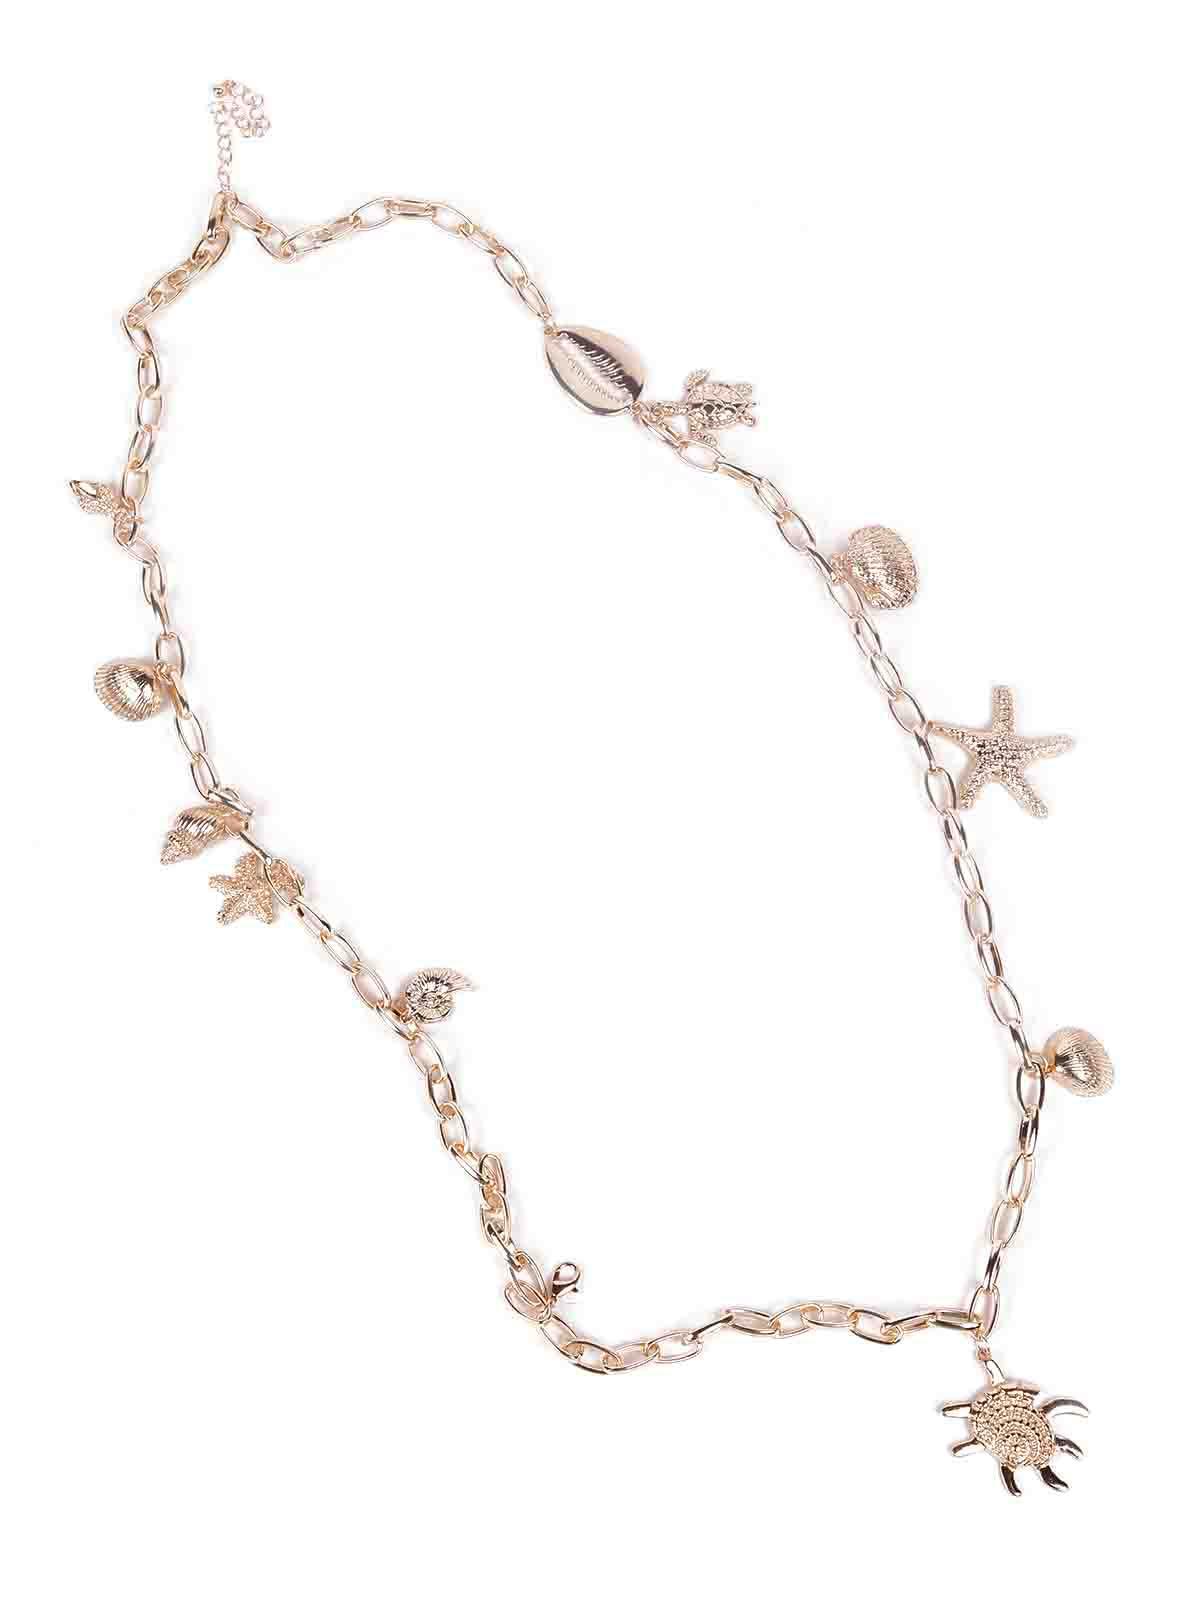 Gold necklace embellished with cute charms - Odette